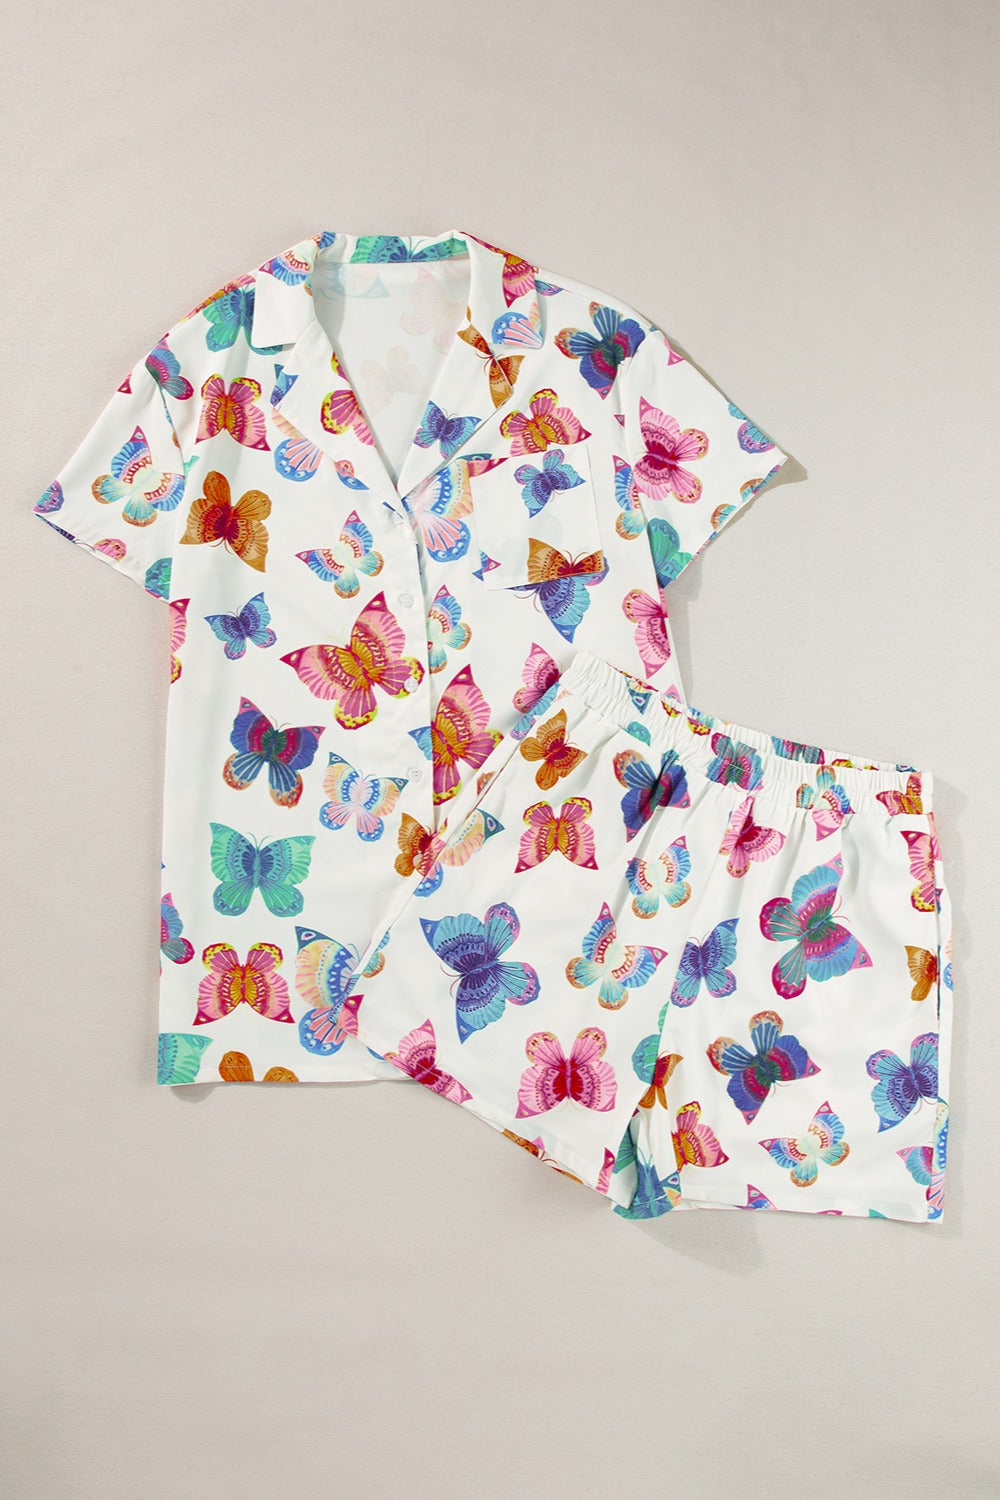 Butterfly Half Sleeve Top and Shorts Set